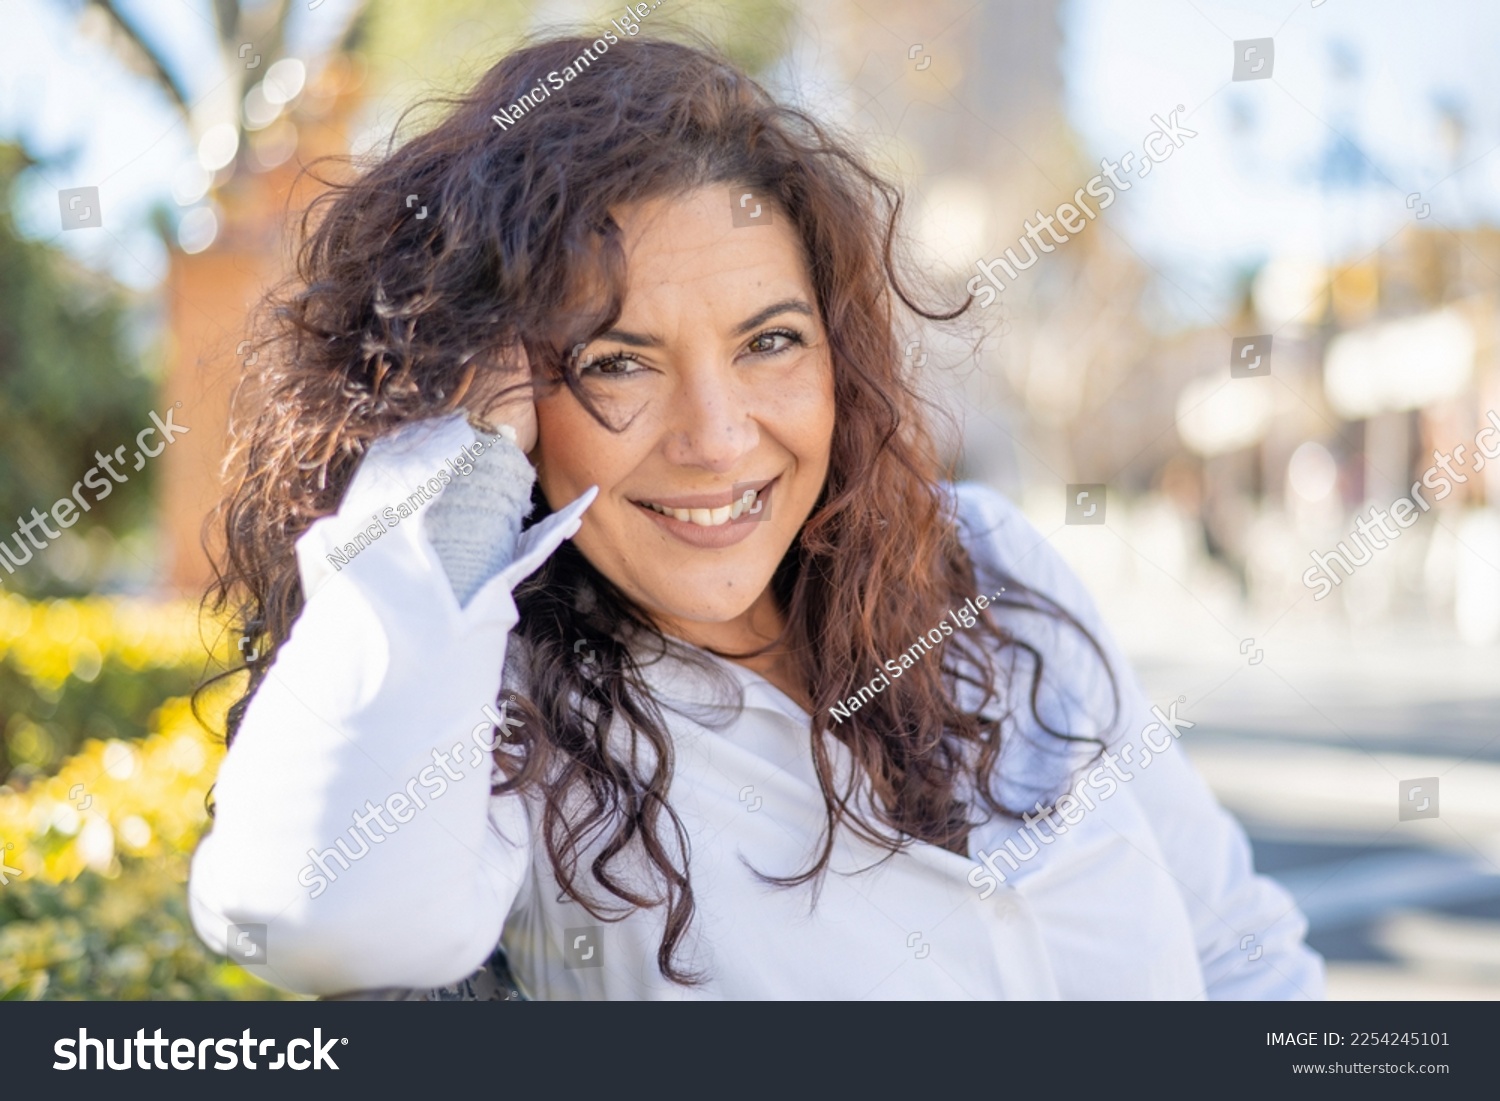 Woman Smiling. Happy Woman Enjoying A Spring Day In A City Park. #2254245101